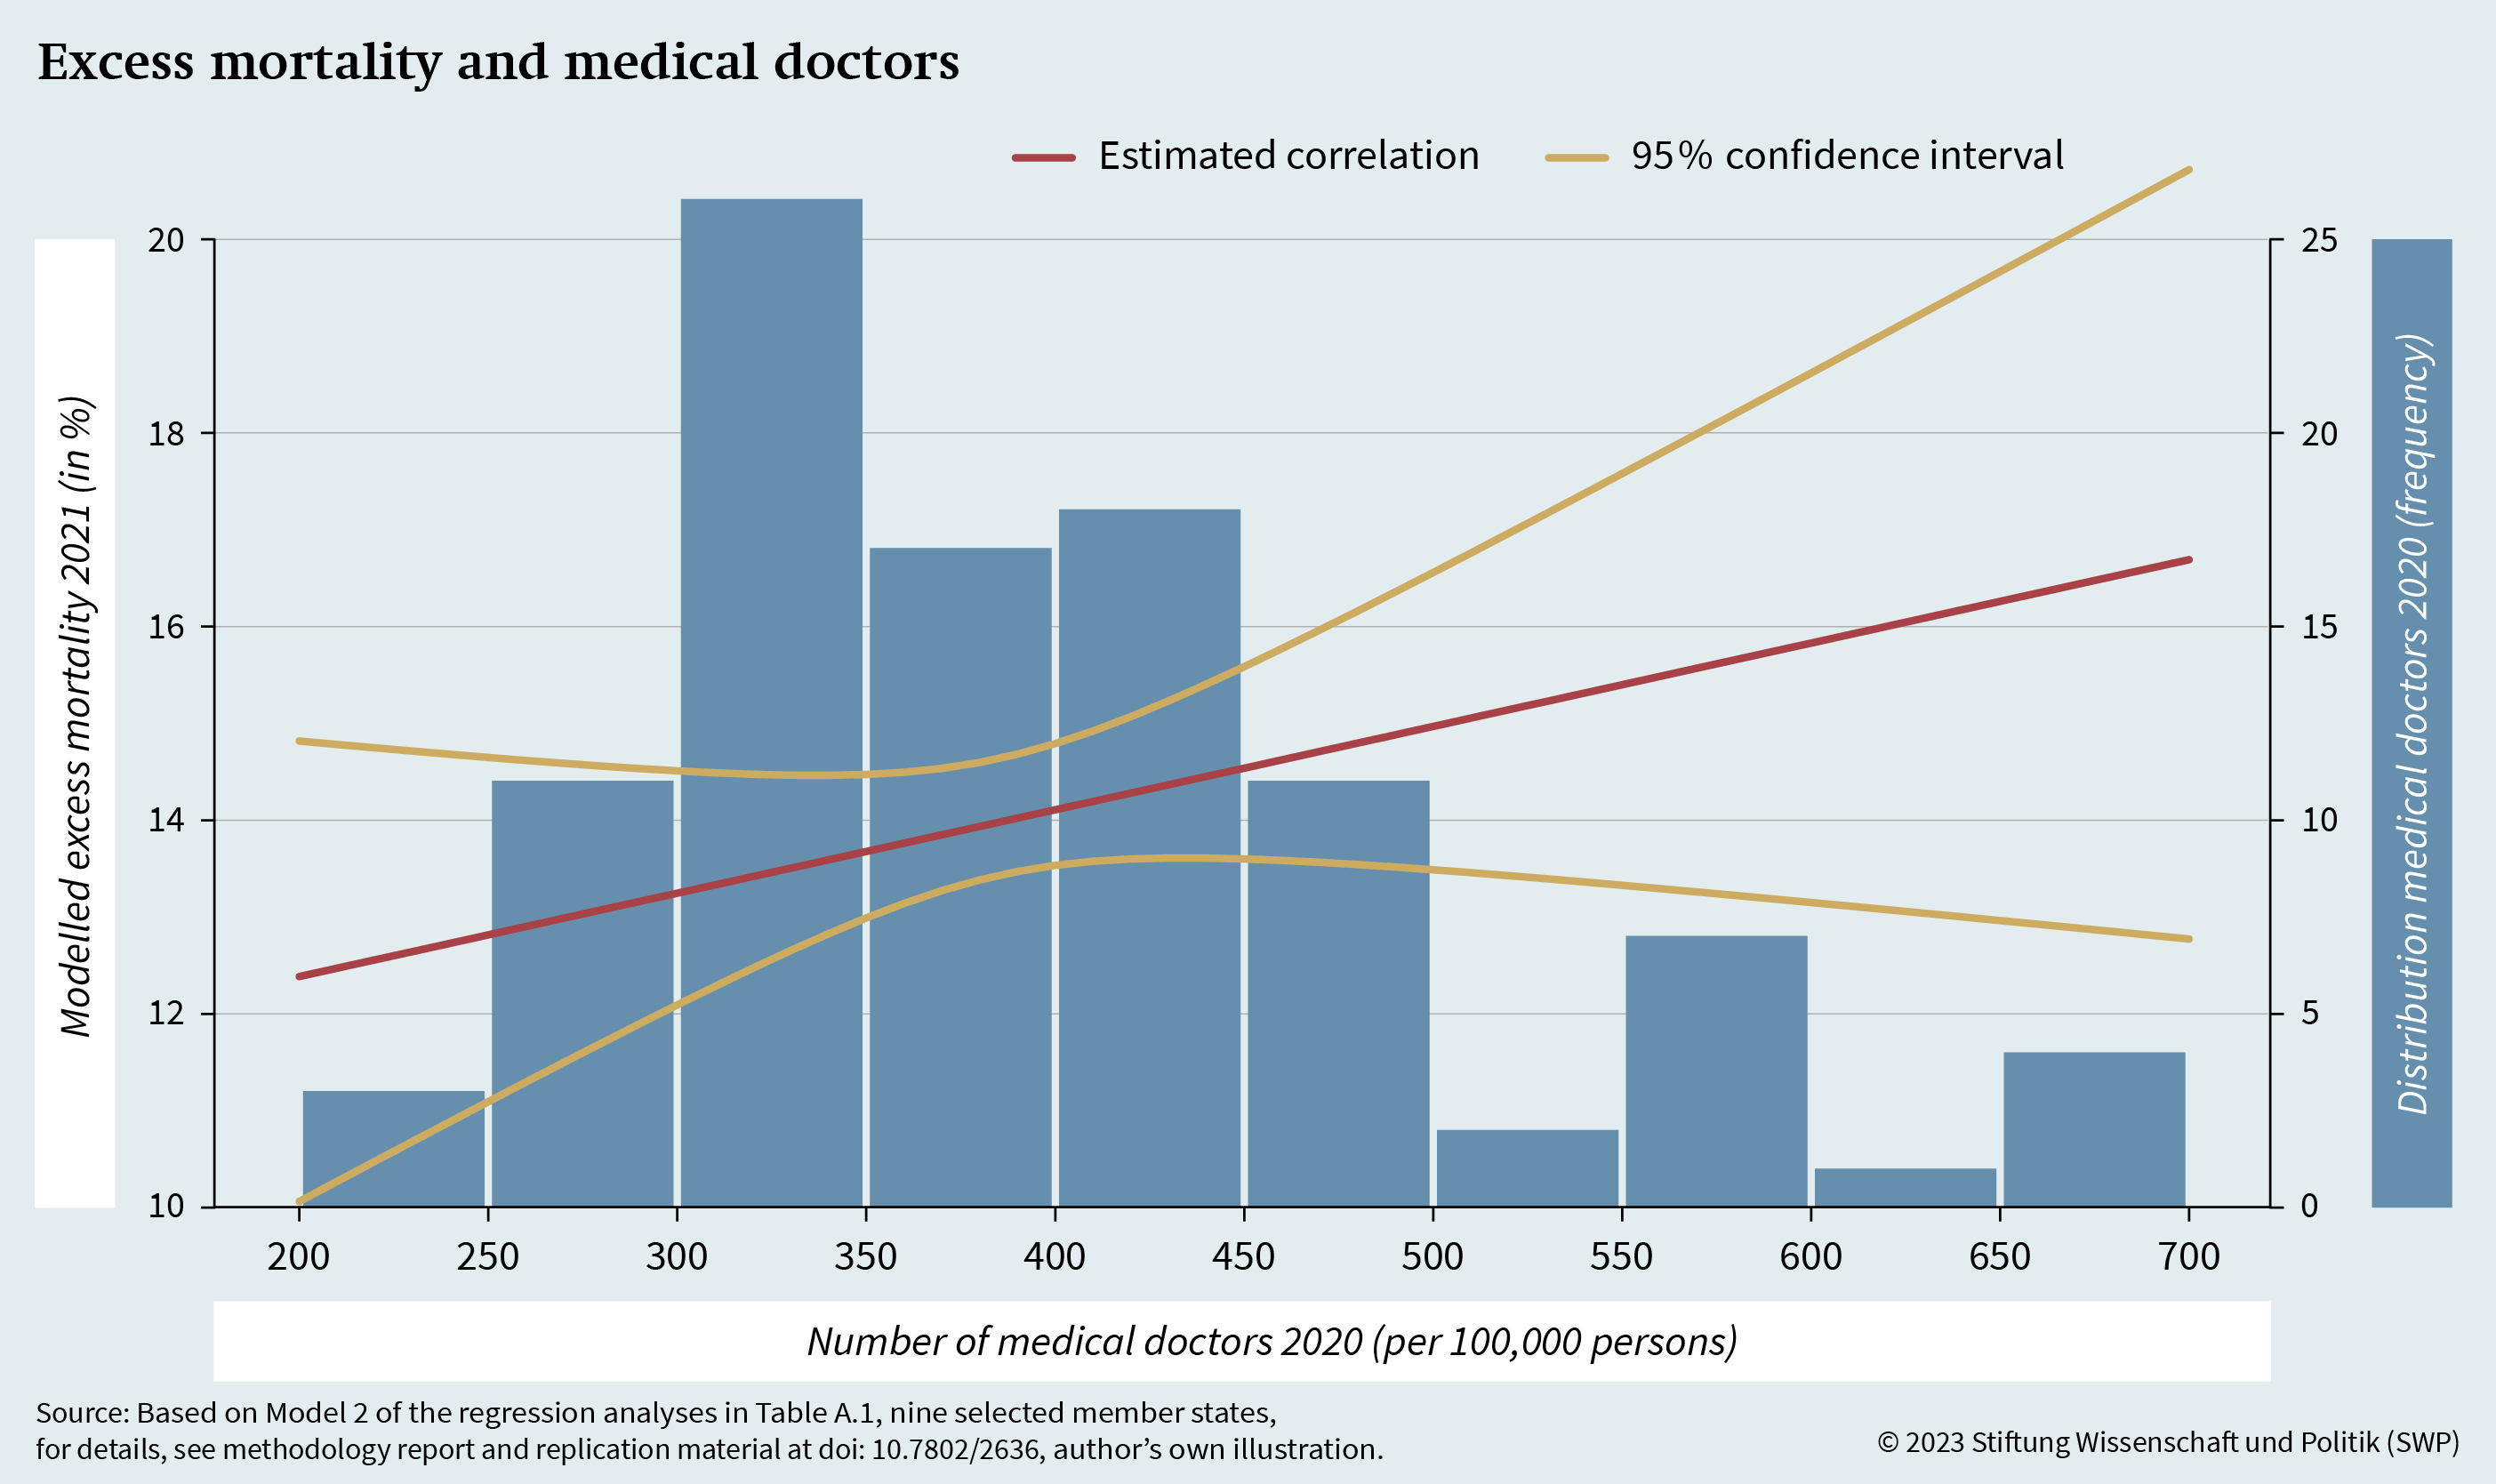 Figure 9: Excess mortality and medical doctors